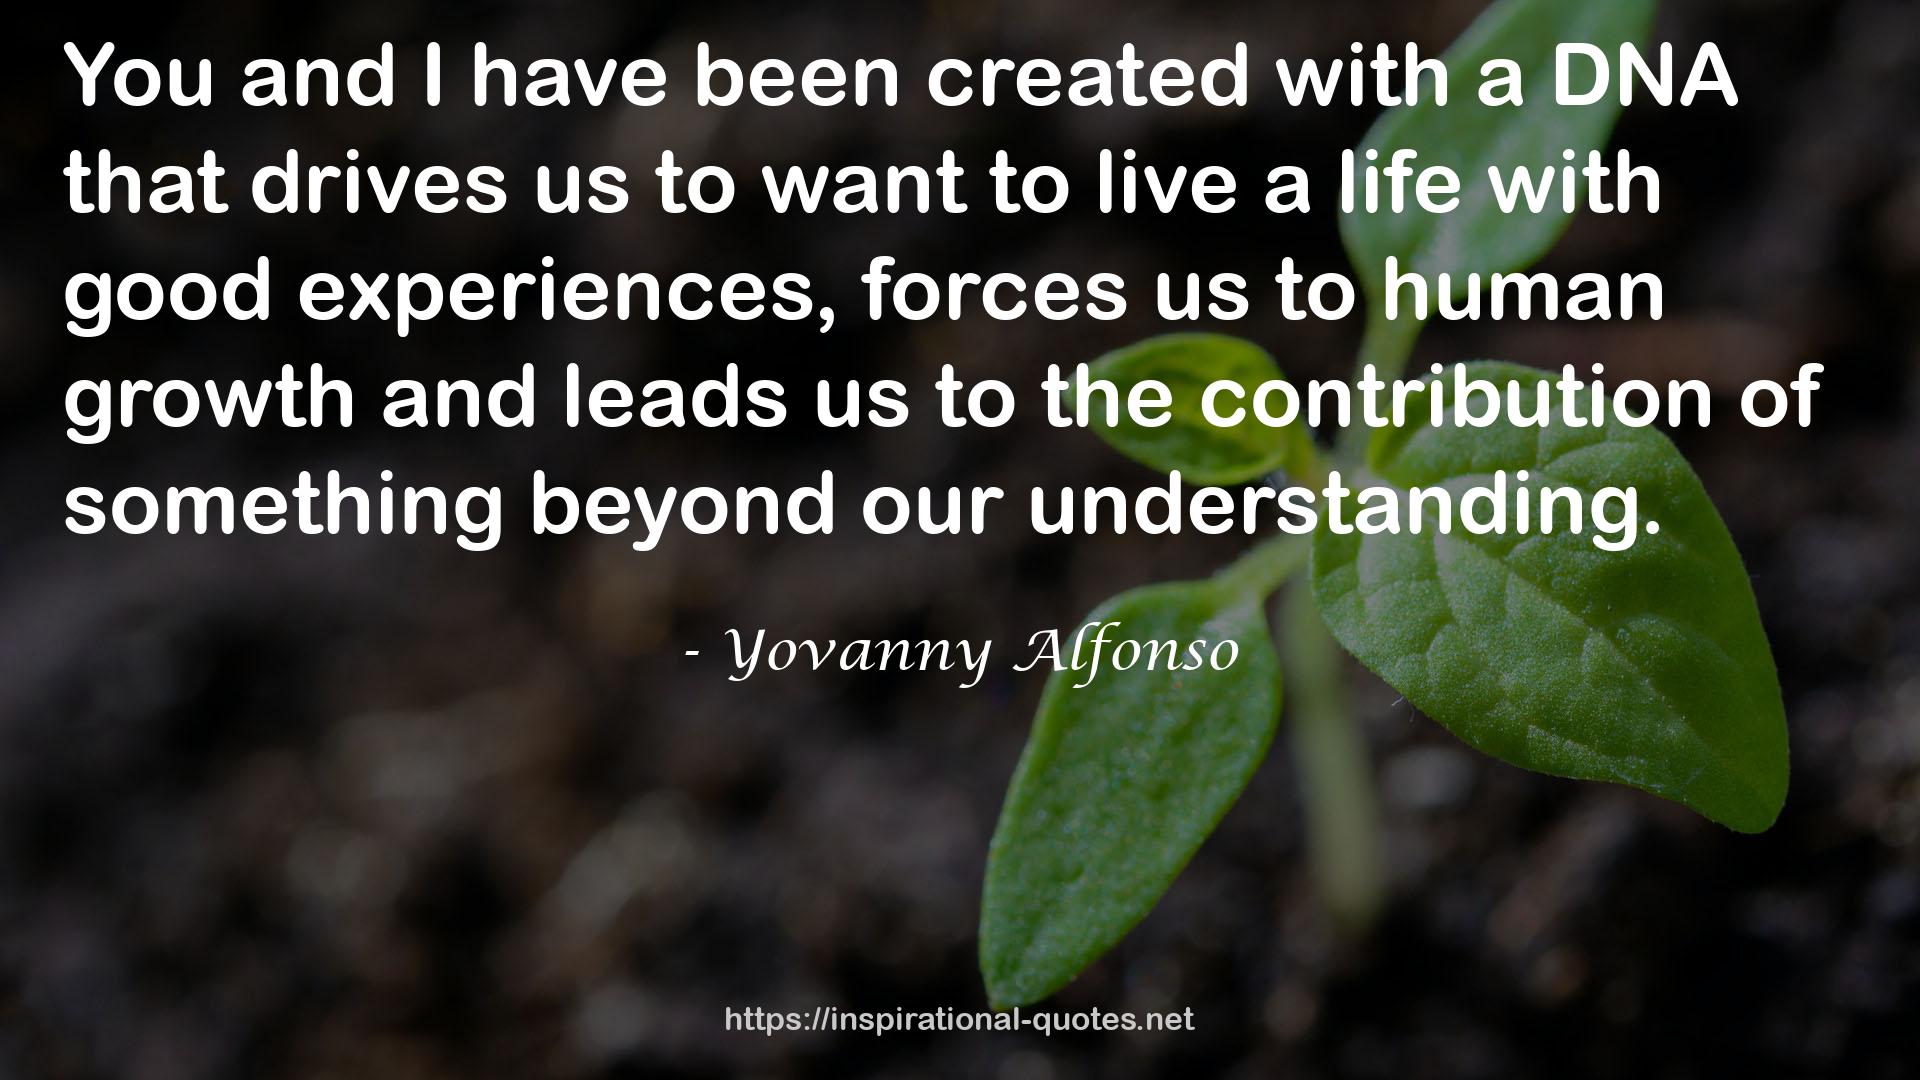 Yovanny Alfonso QUOTES